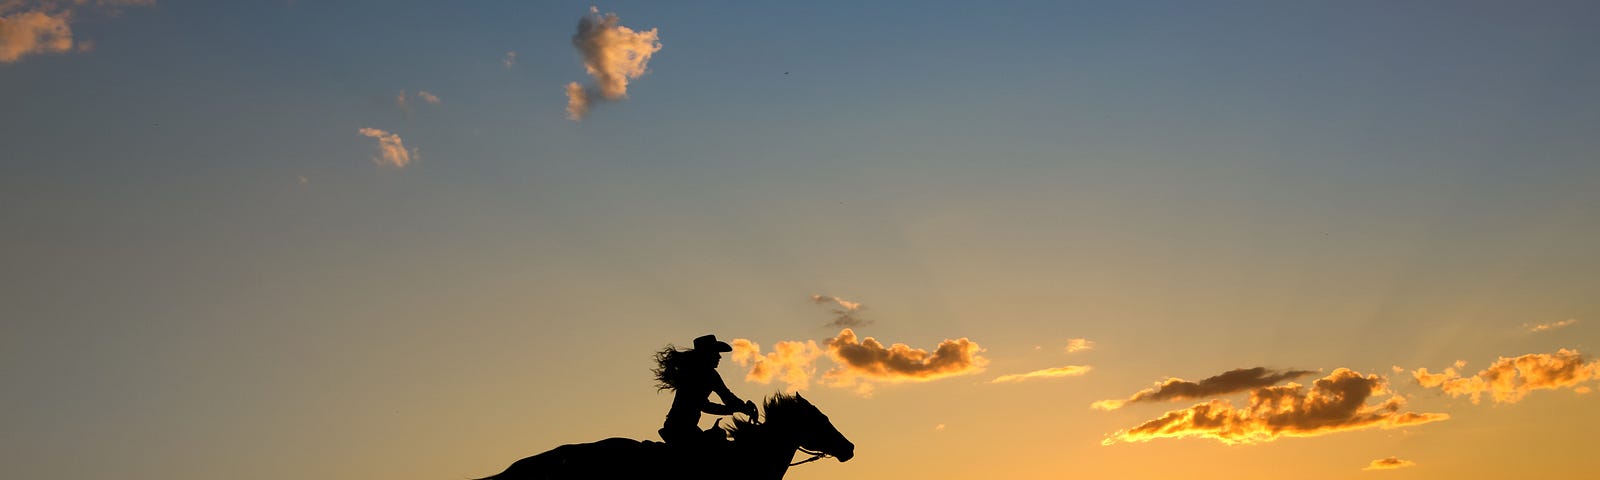 A silhouette of a girl galloping on a horse at sunrise. The horse has his mane and tail flying.